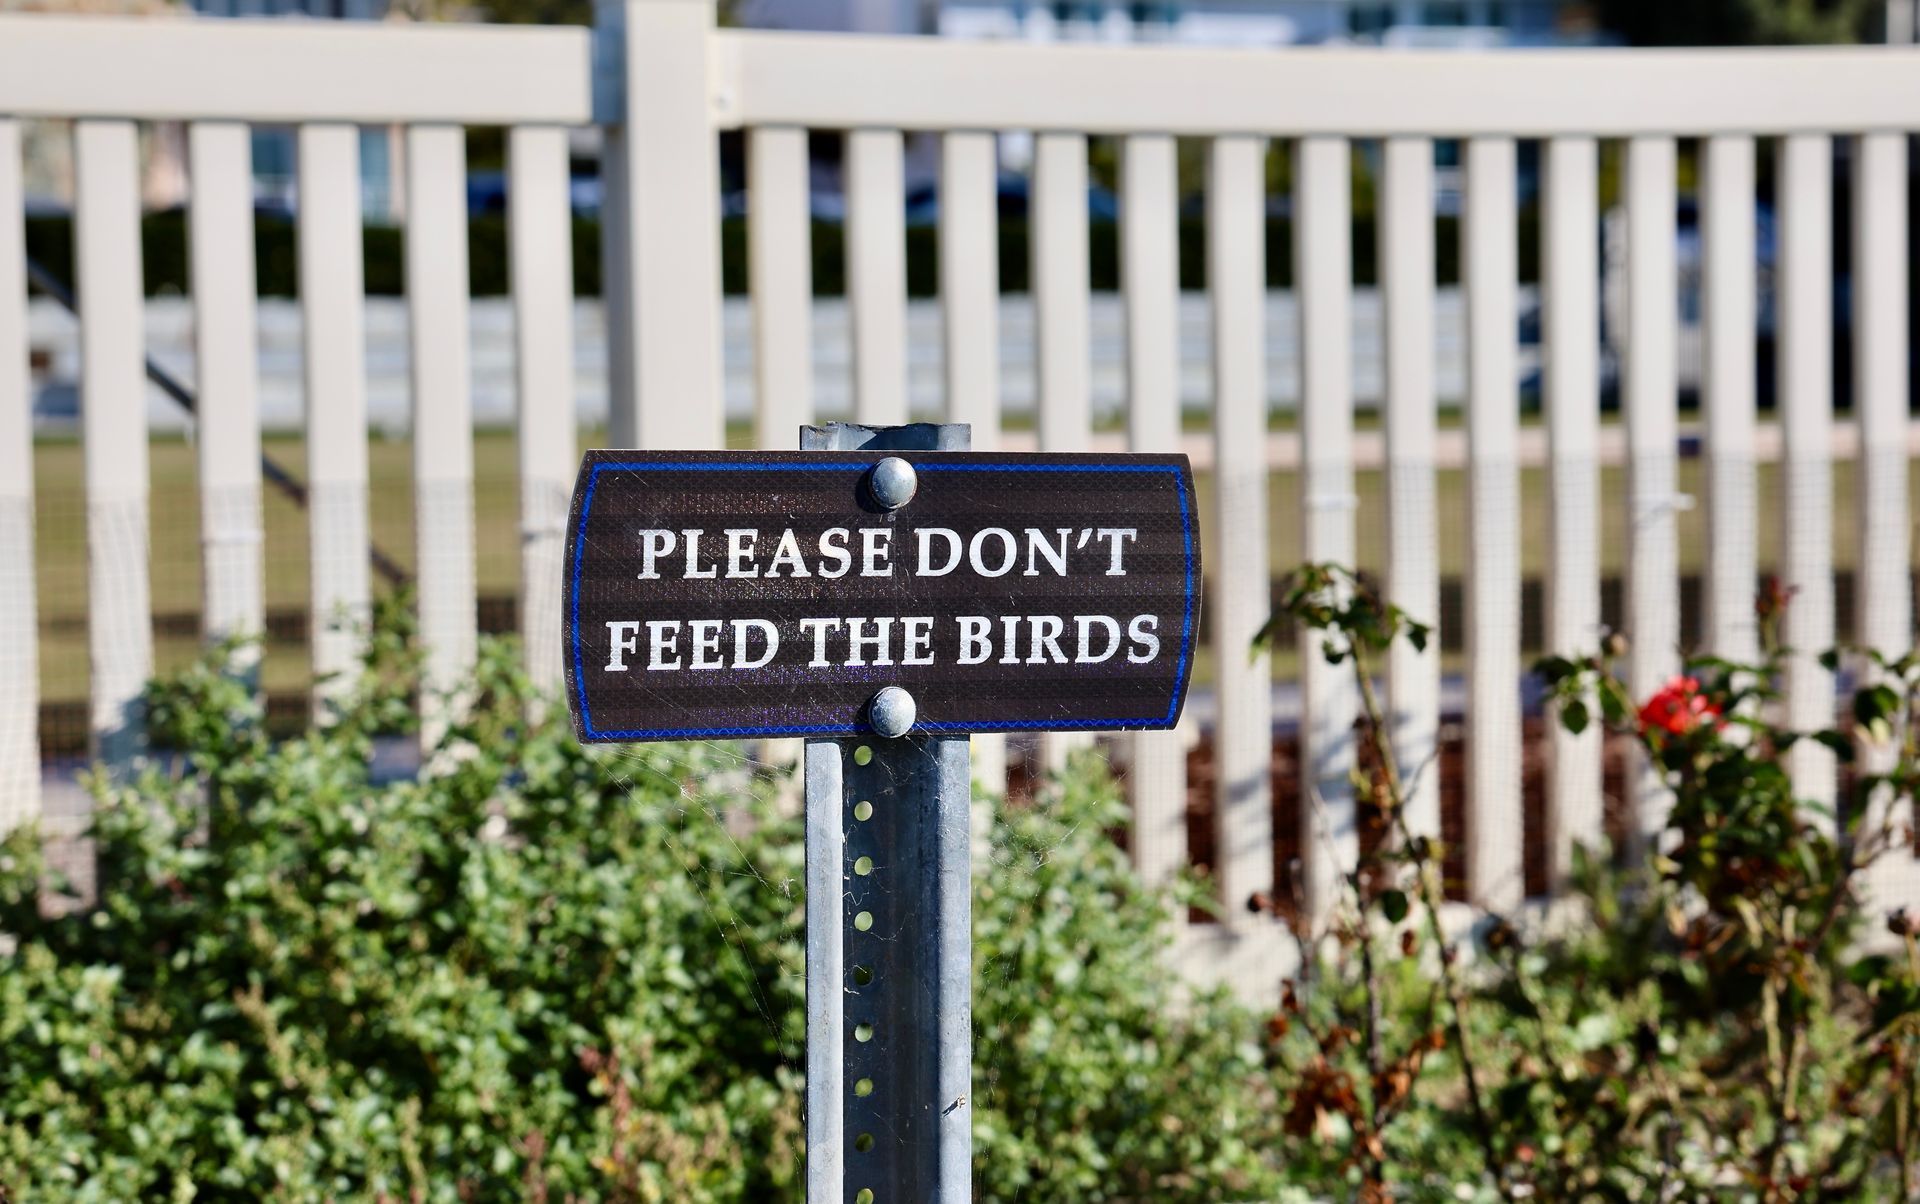 Don’t feed the birds, you could get fined